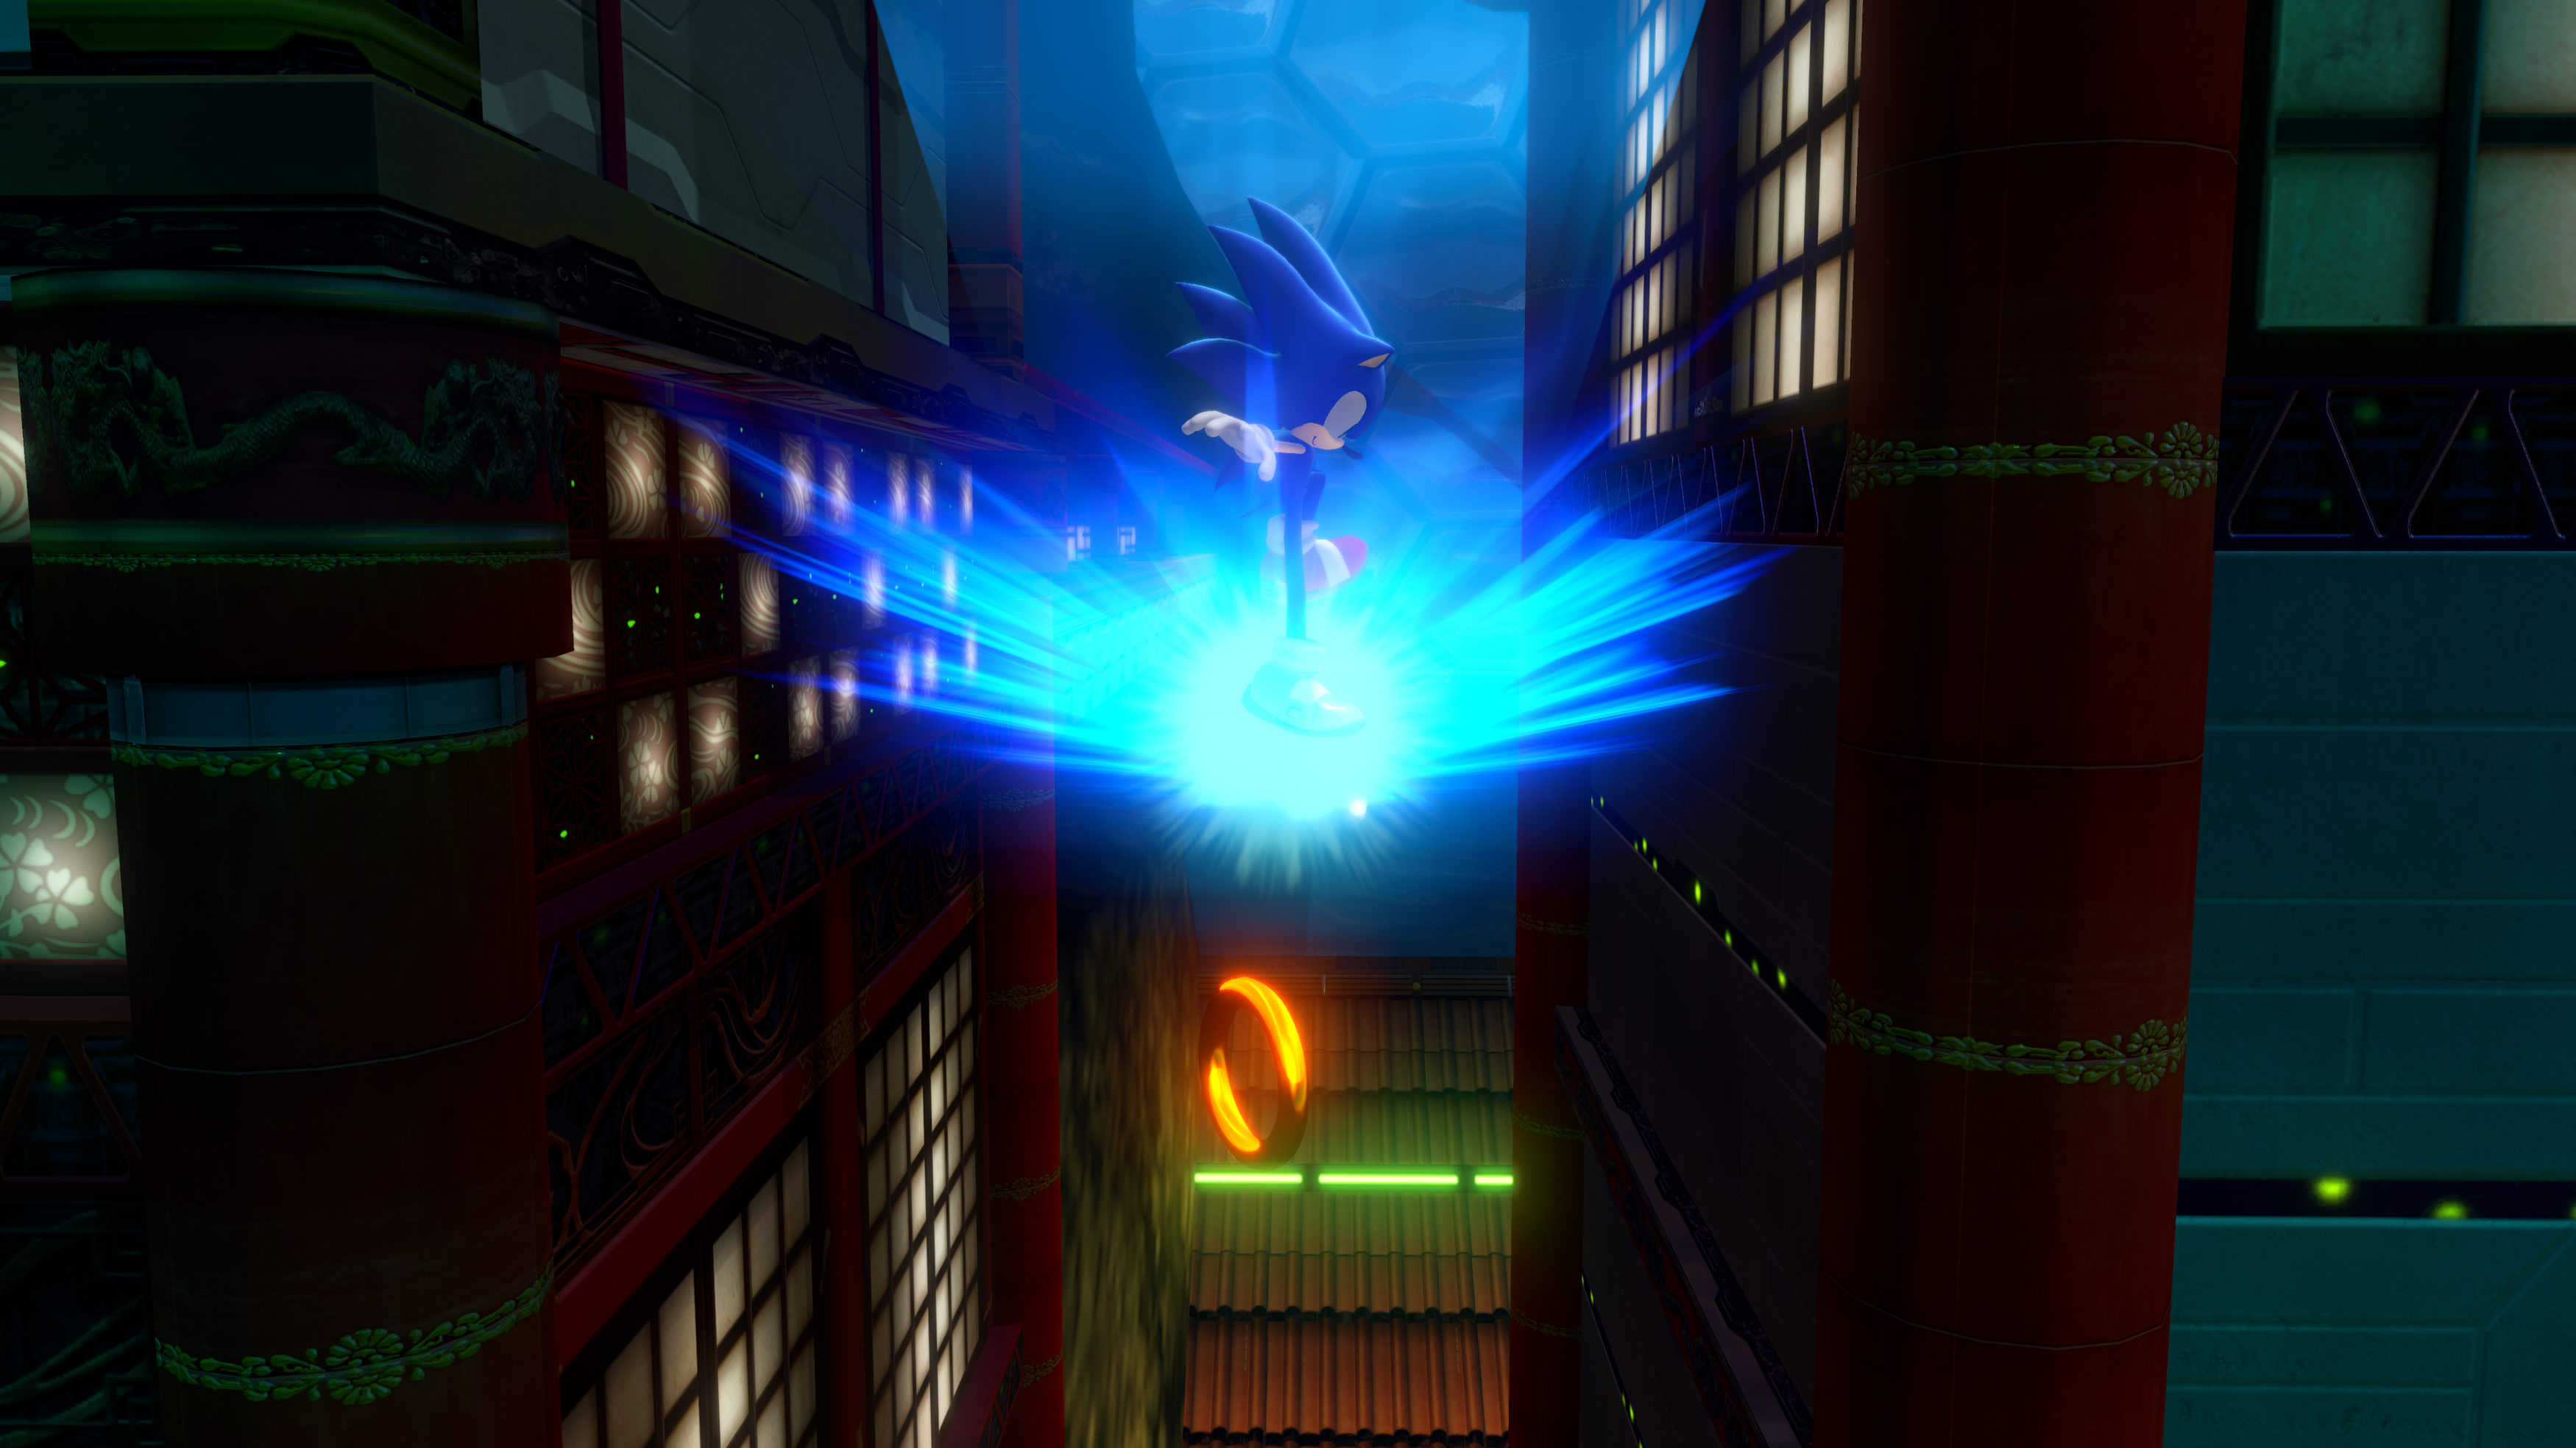 Sonic Colors: Ultimate - Made with Godot?